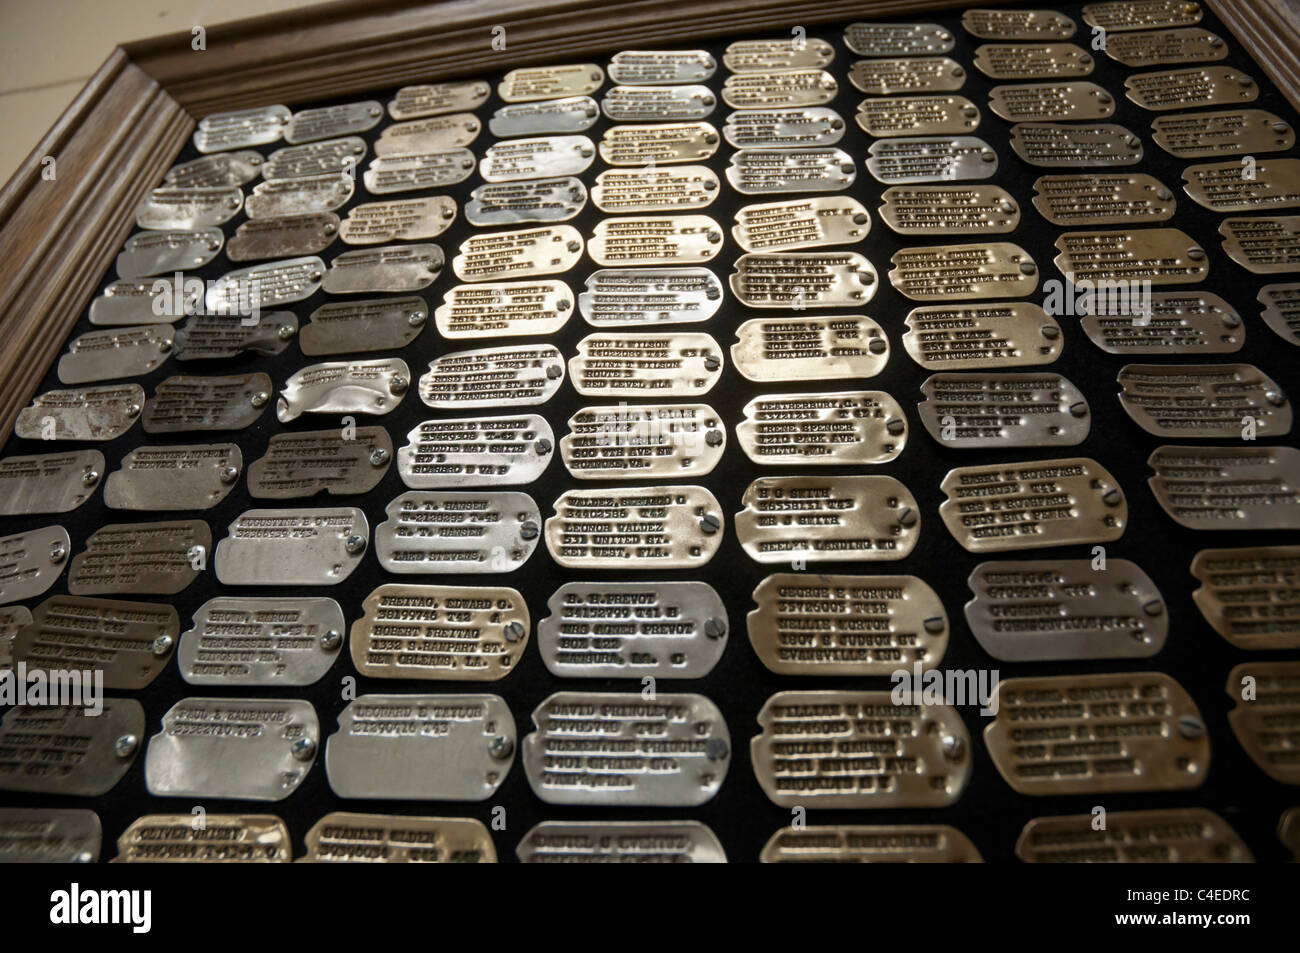 Florida Panhandle Carrabelle.  Collection of old military dog tags at Camp Gordon Johnston World War 2 Museum. Stock Photo